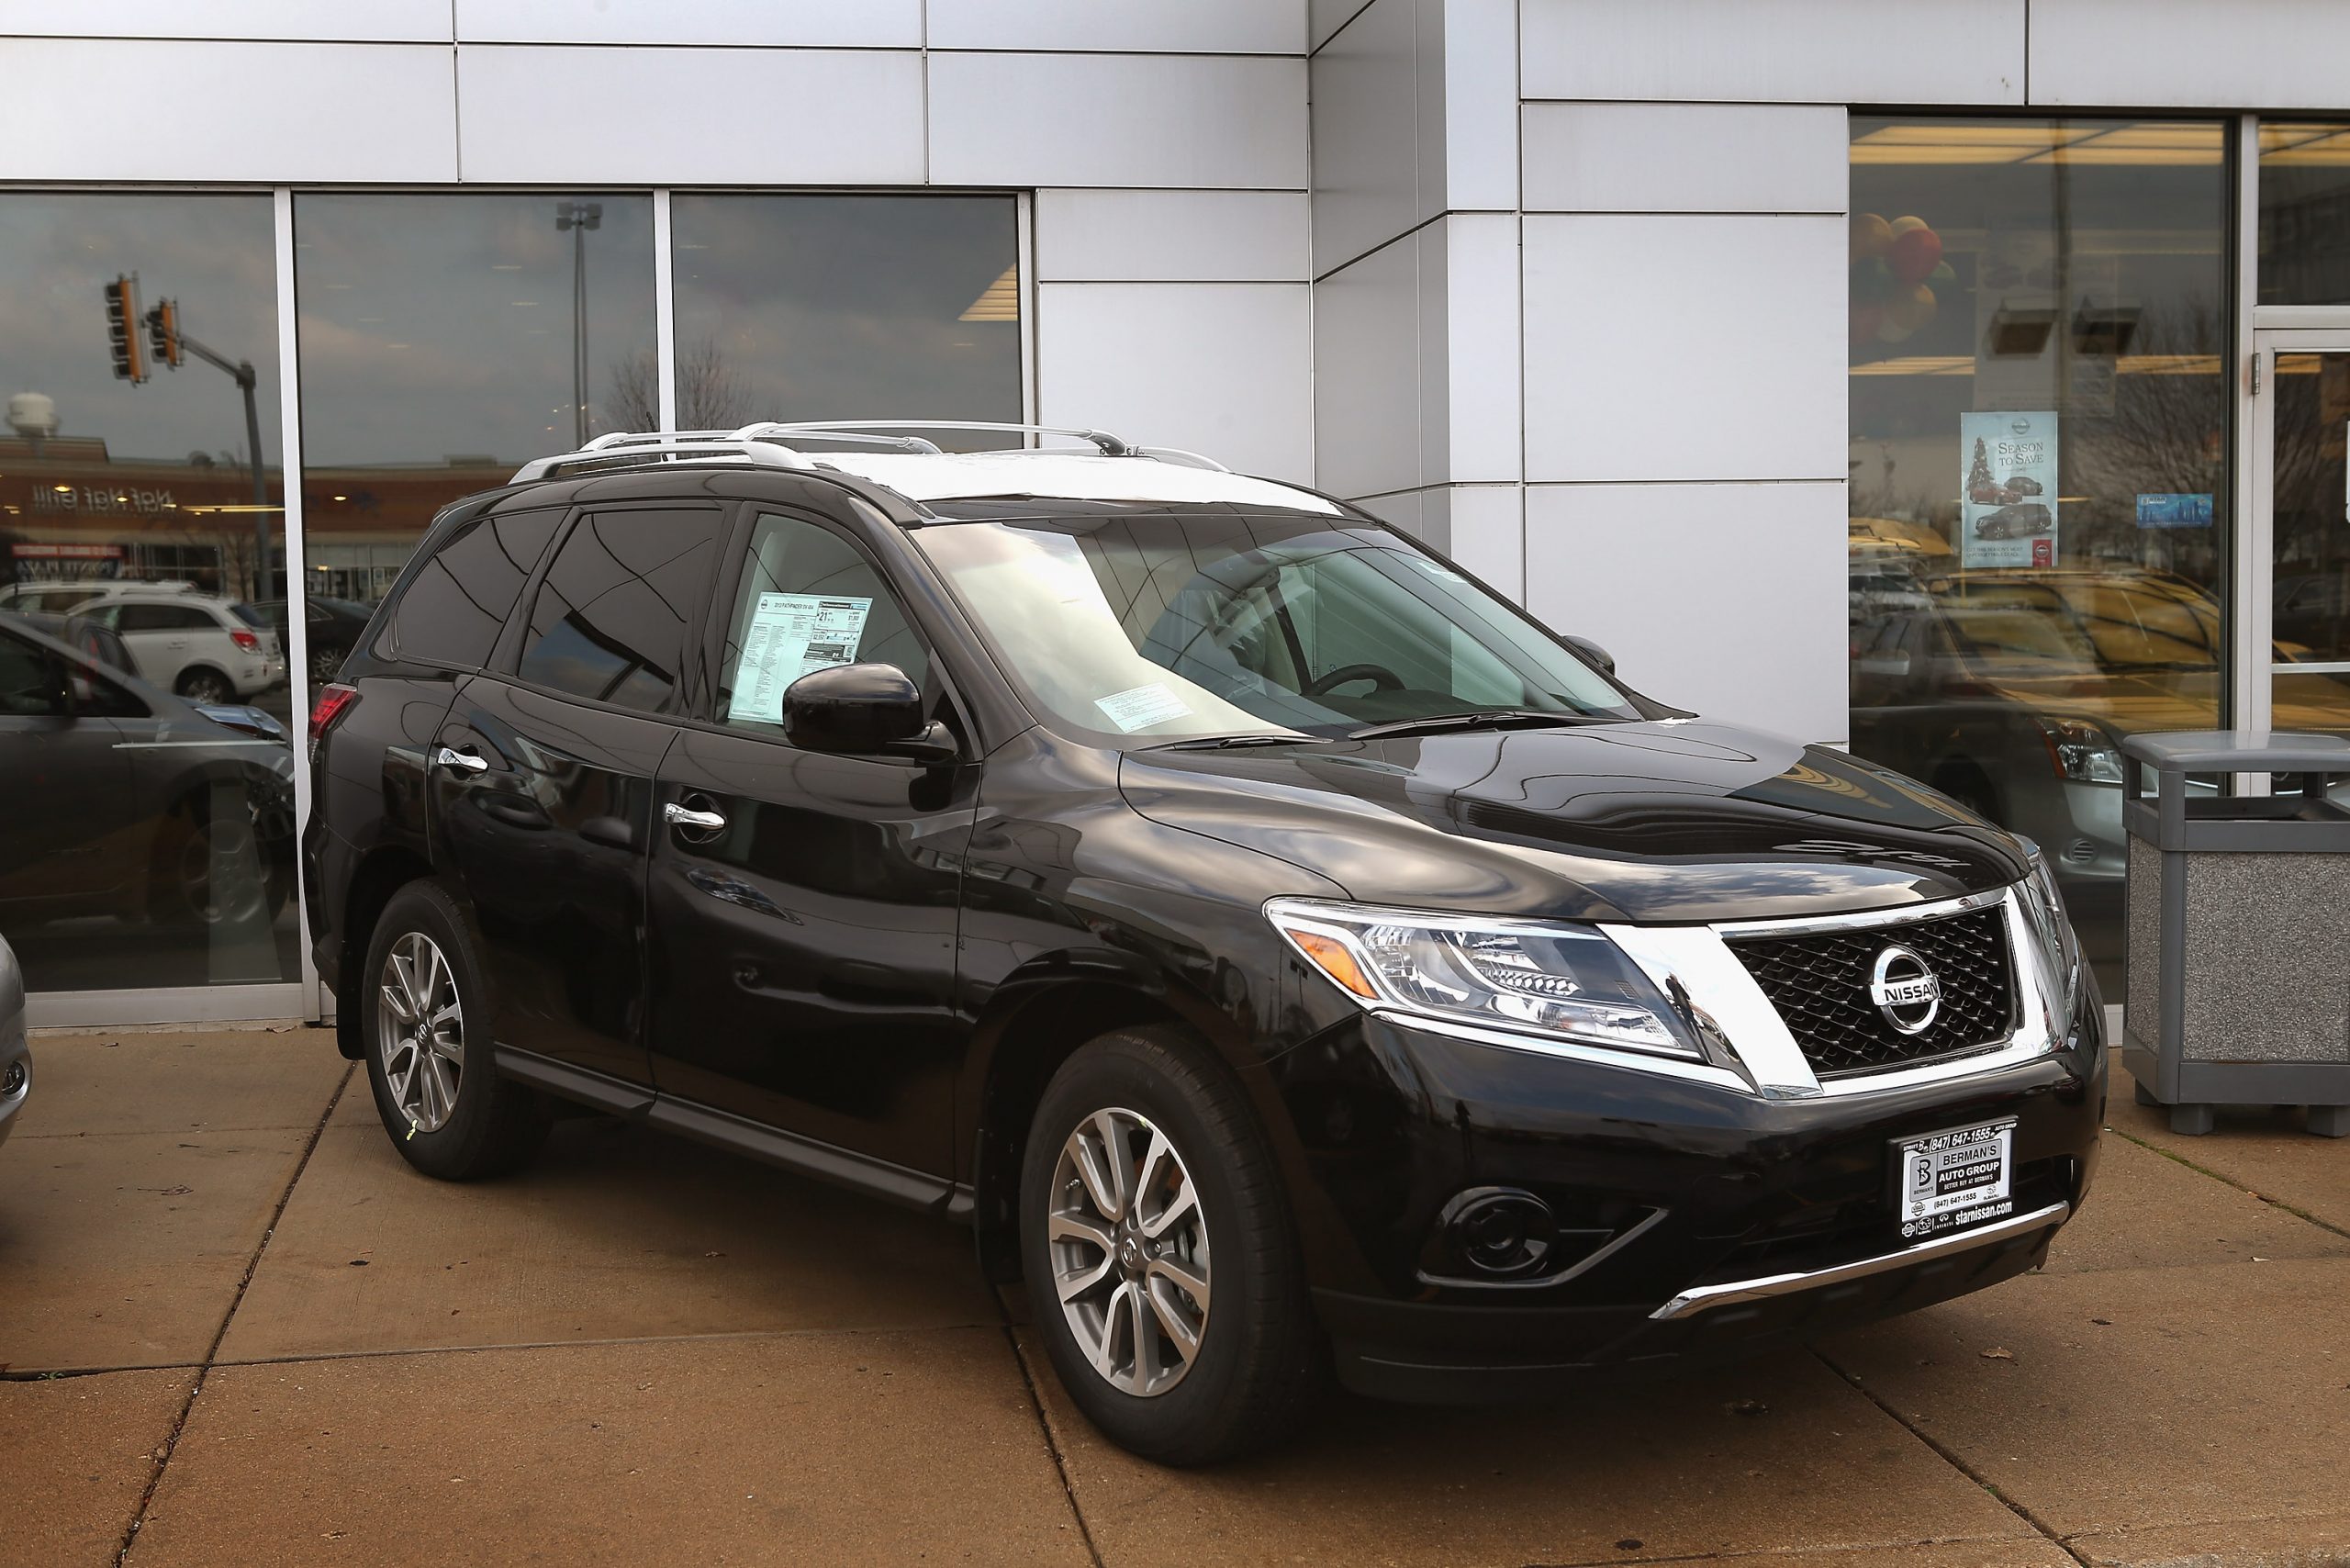 A used Nissan Pathfinder for sale